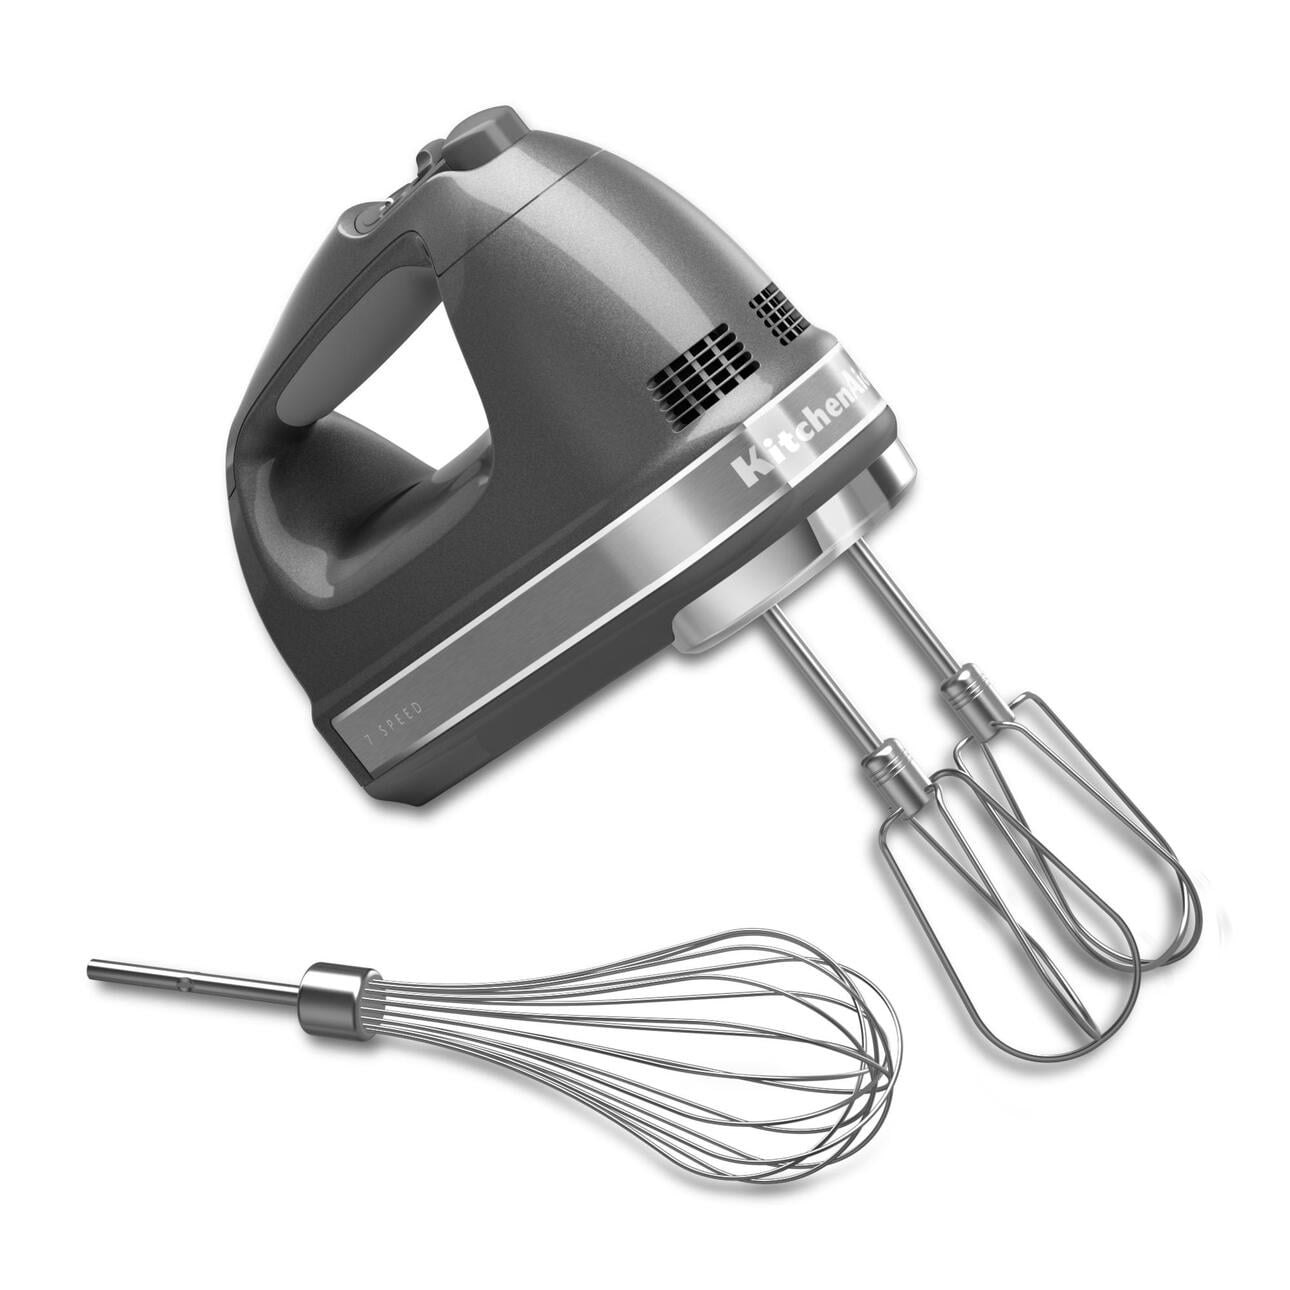 Hand Mixer Electric, 450W Kitchen Mixers with Scale Cup Storage